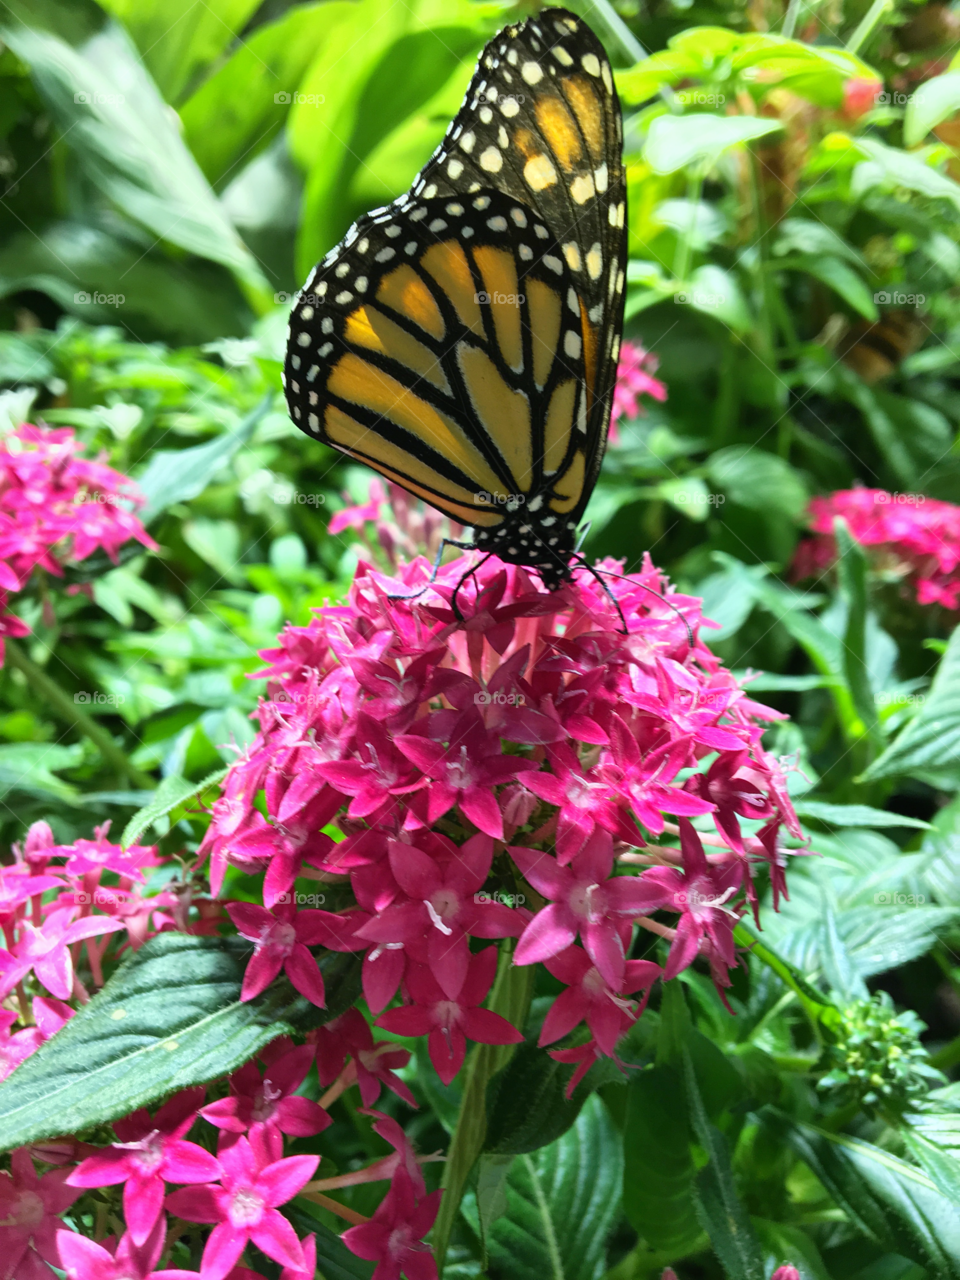 A monarch butterfly perches on some bright pink flowers